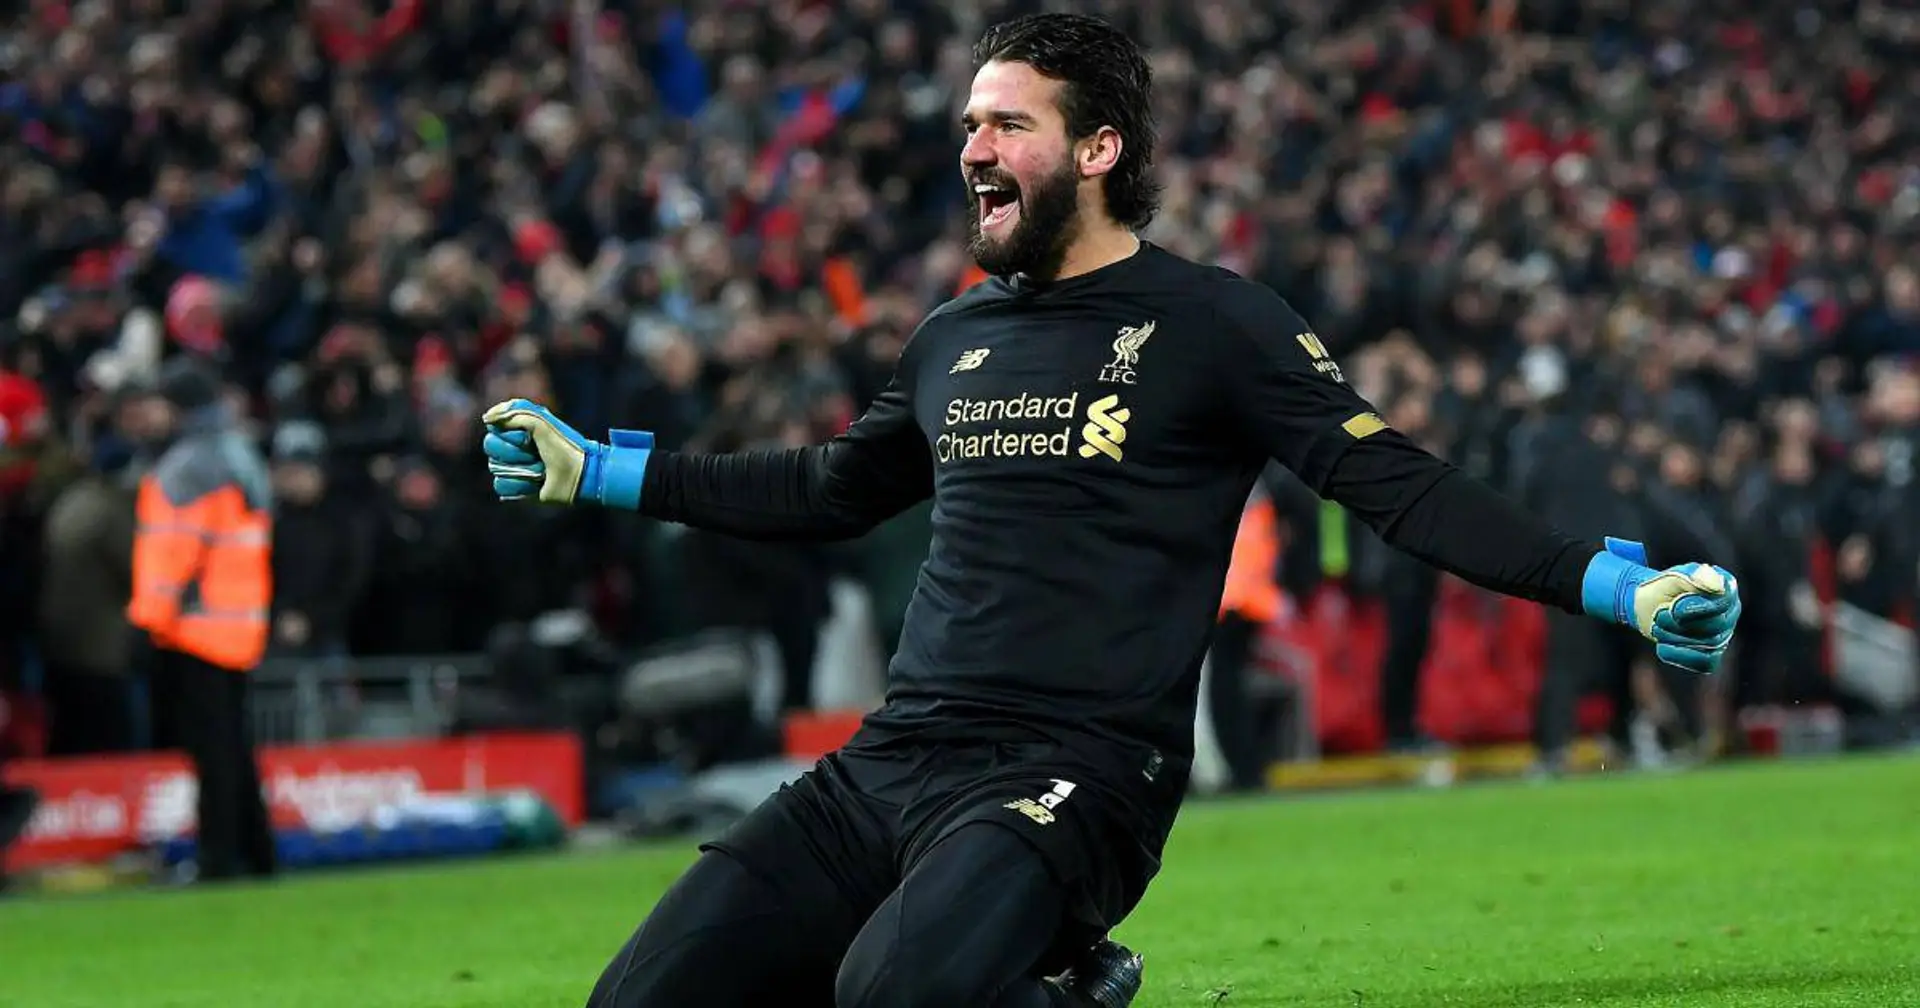 'It means everything': Alisson pledges loyalty to Liverpool family after historic PL success